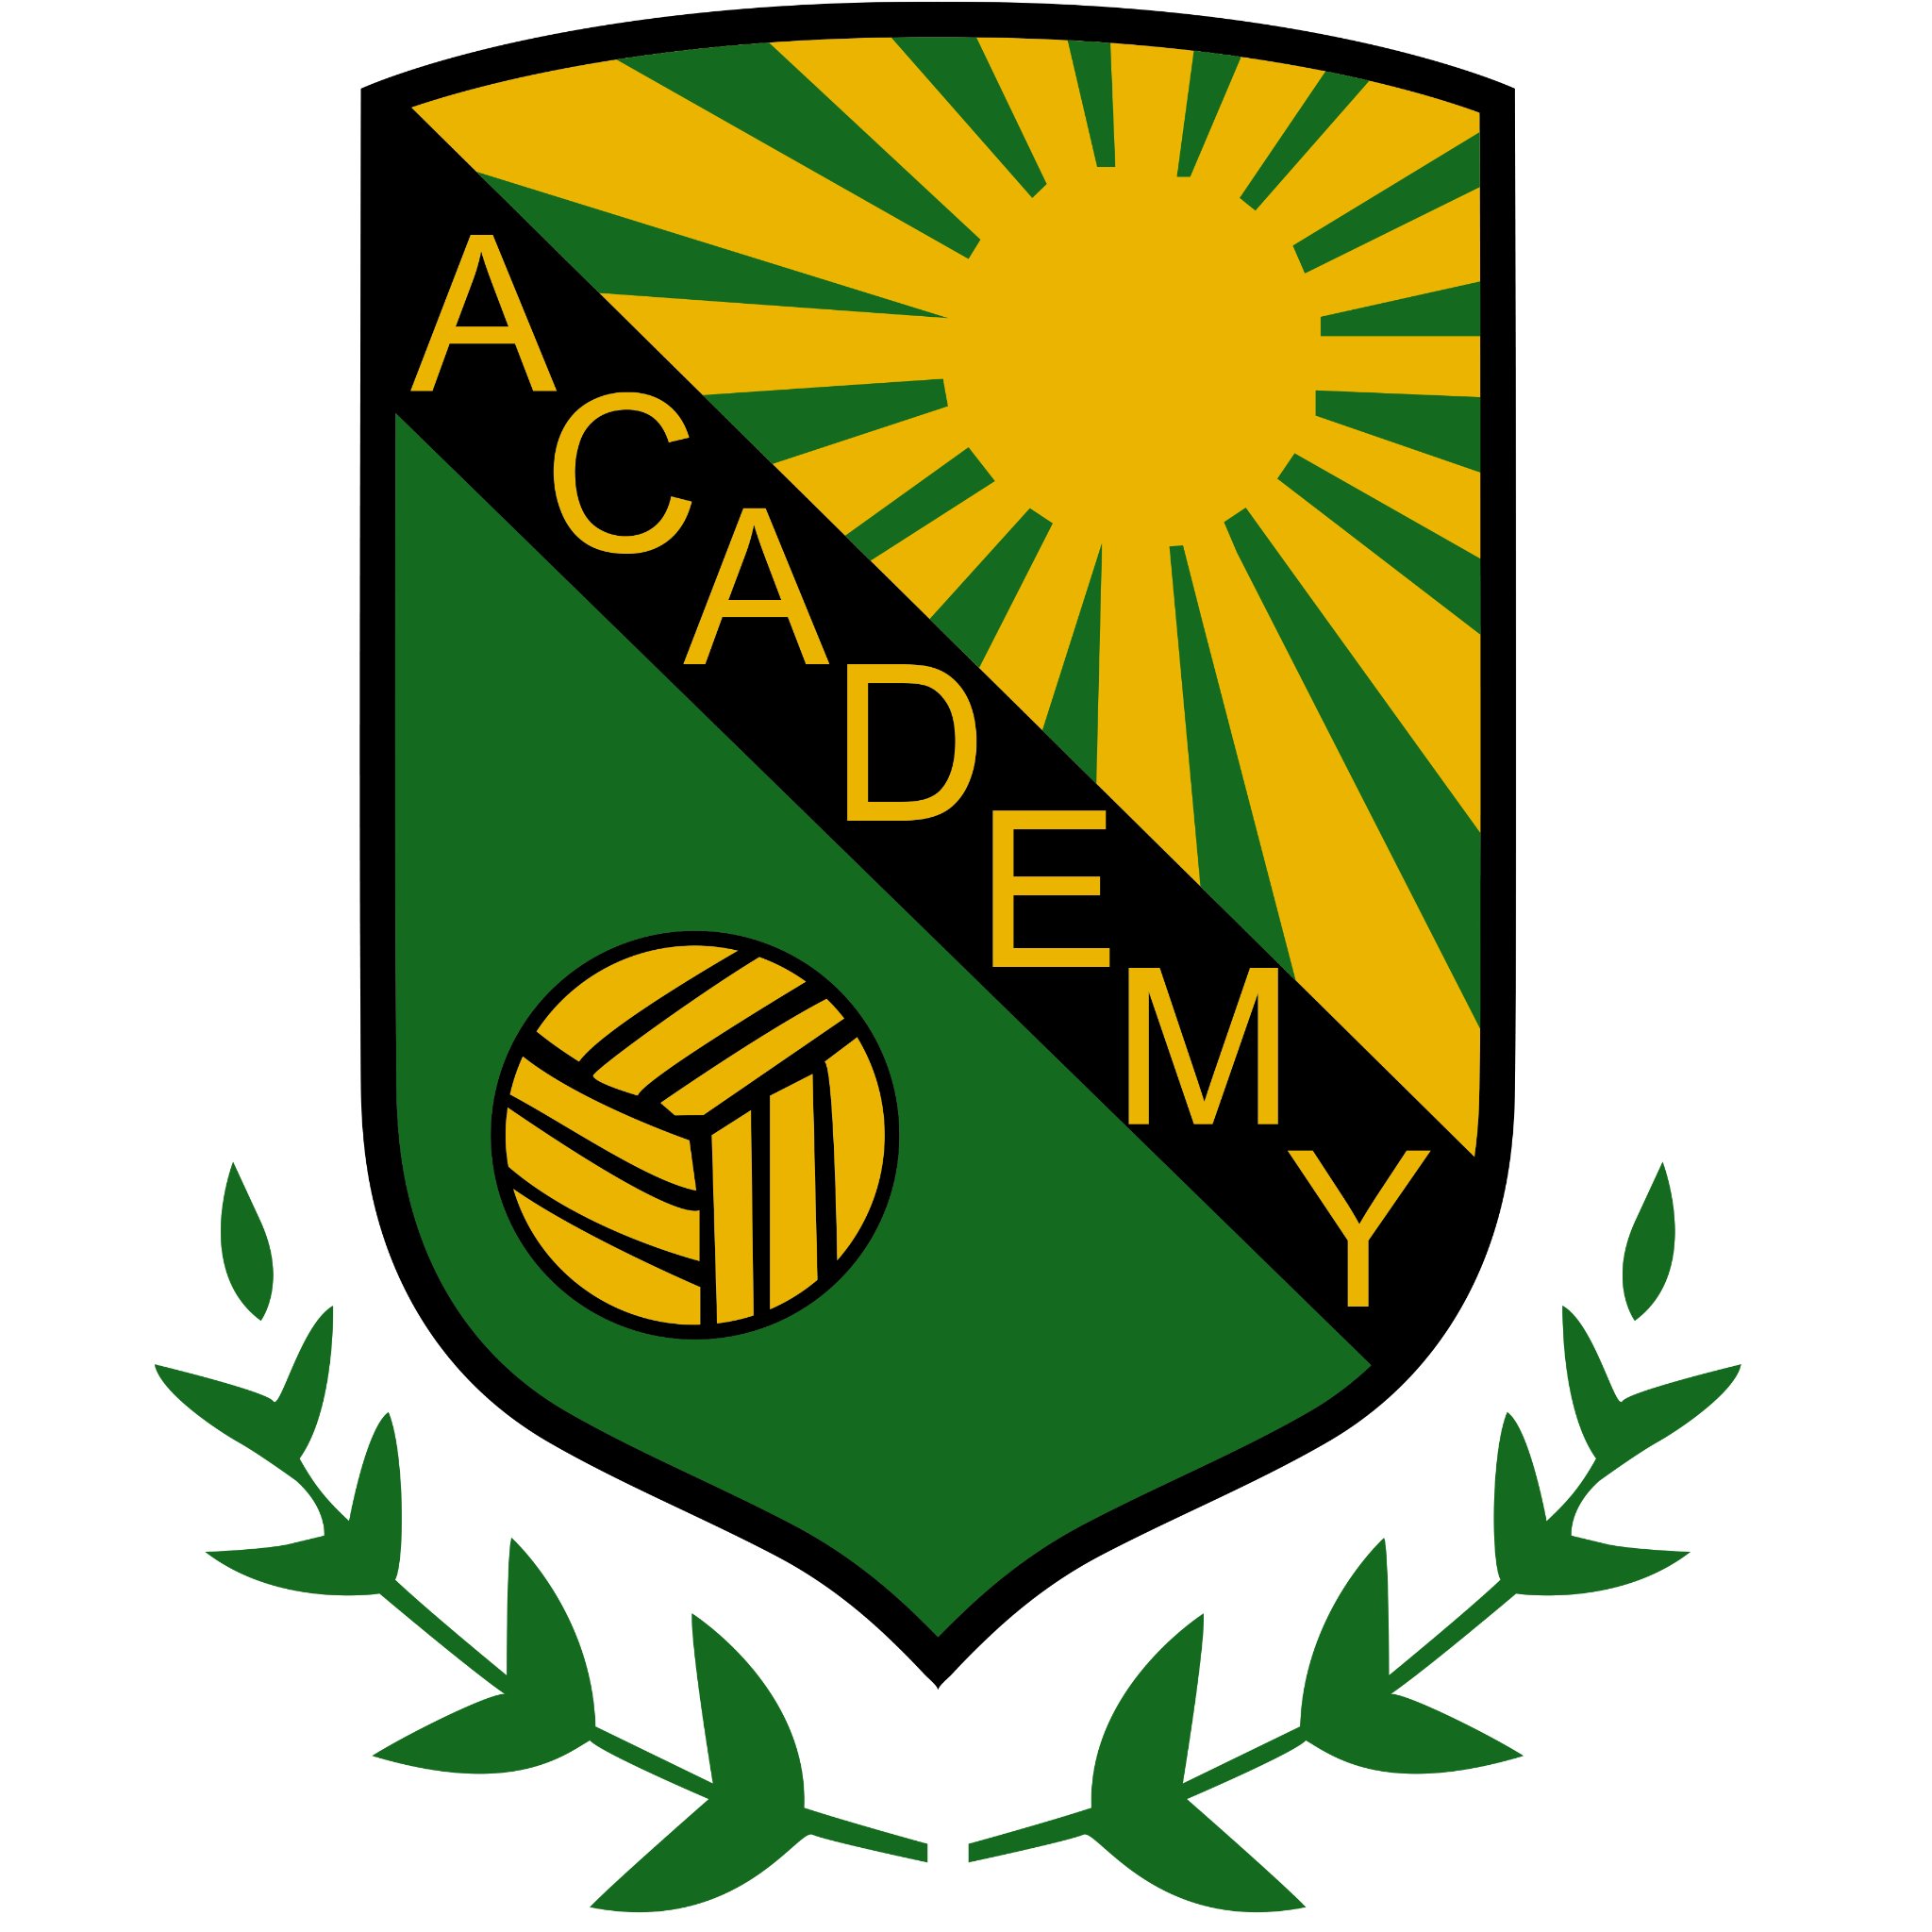 Official Twitter of Academy Volleyball Club. We are dedicated in providing the best club volleyball experience for youth and junior athletes in the Bay Area.